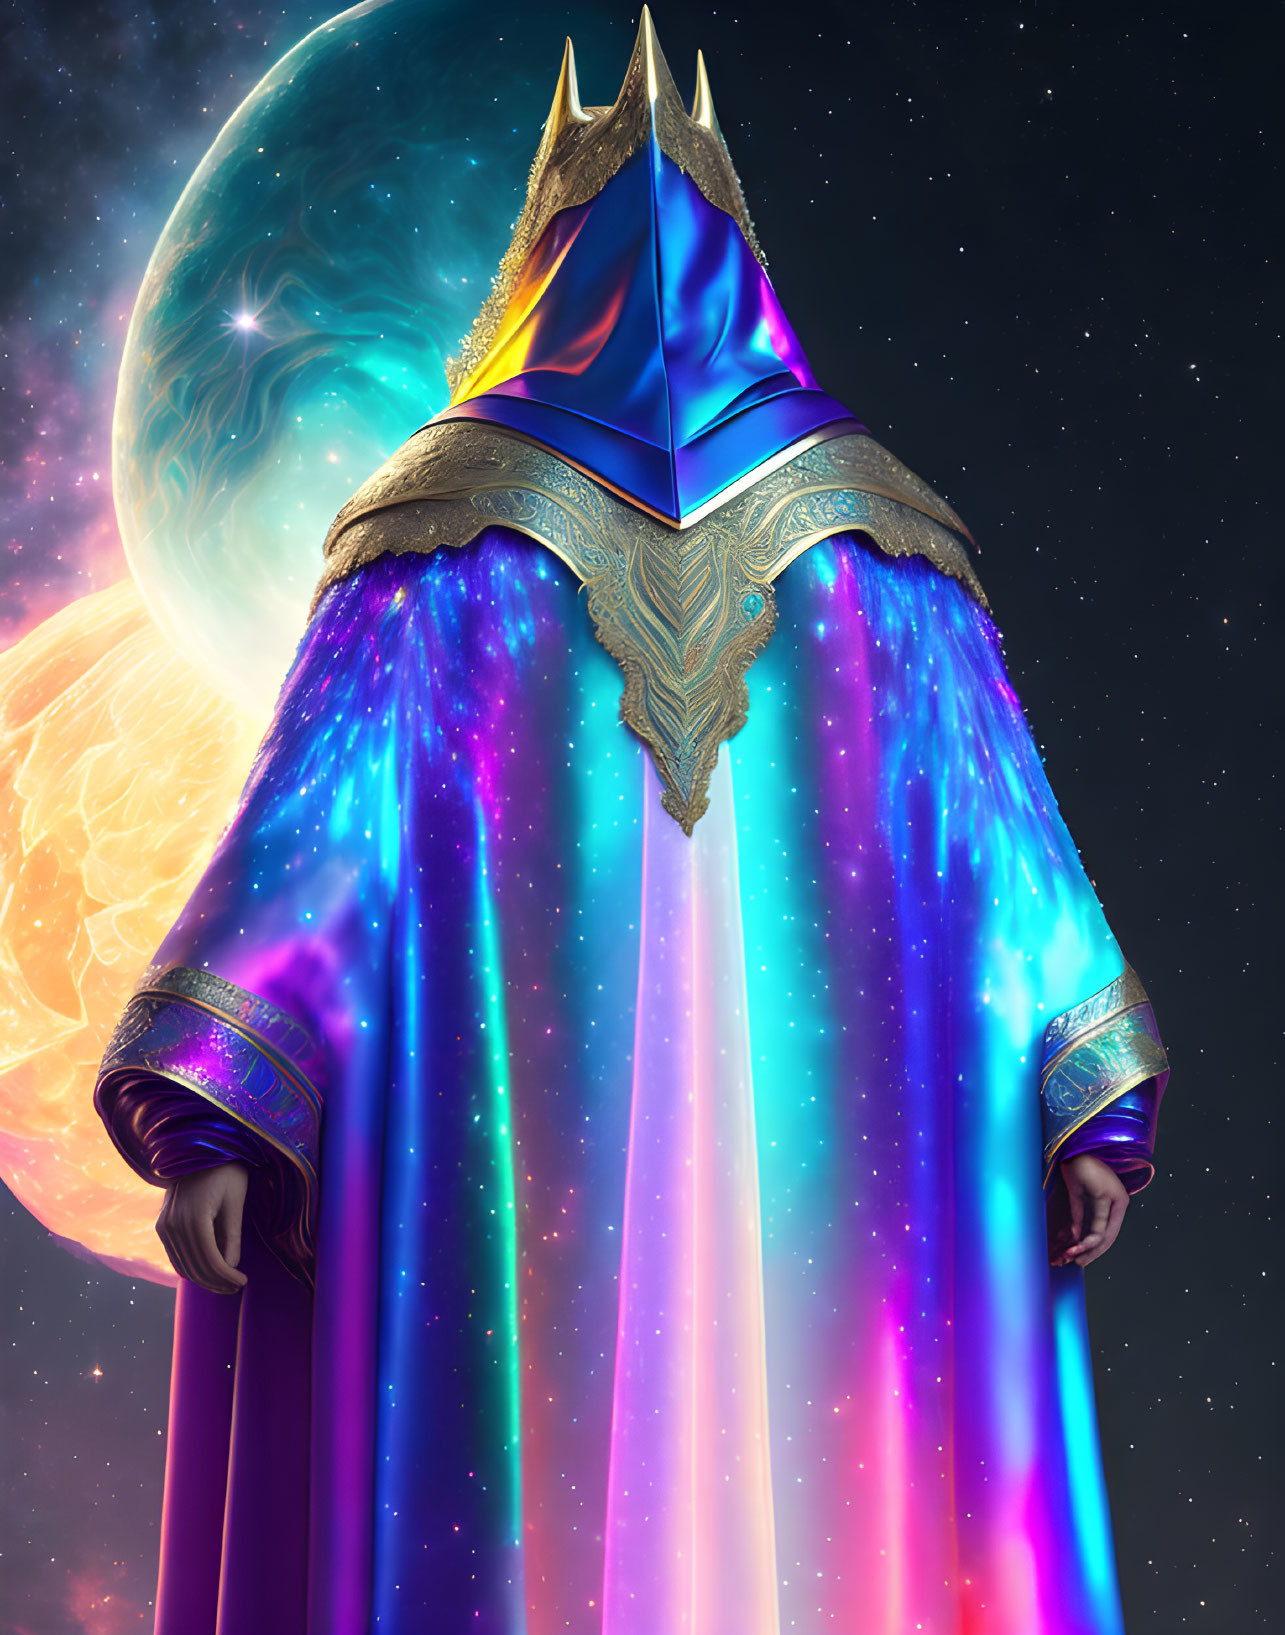 Majestic figure in cosmic robe with moon and sun backdrop